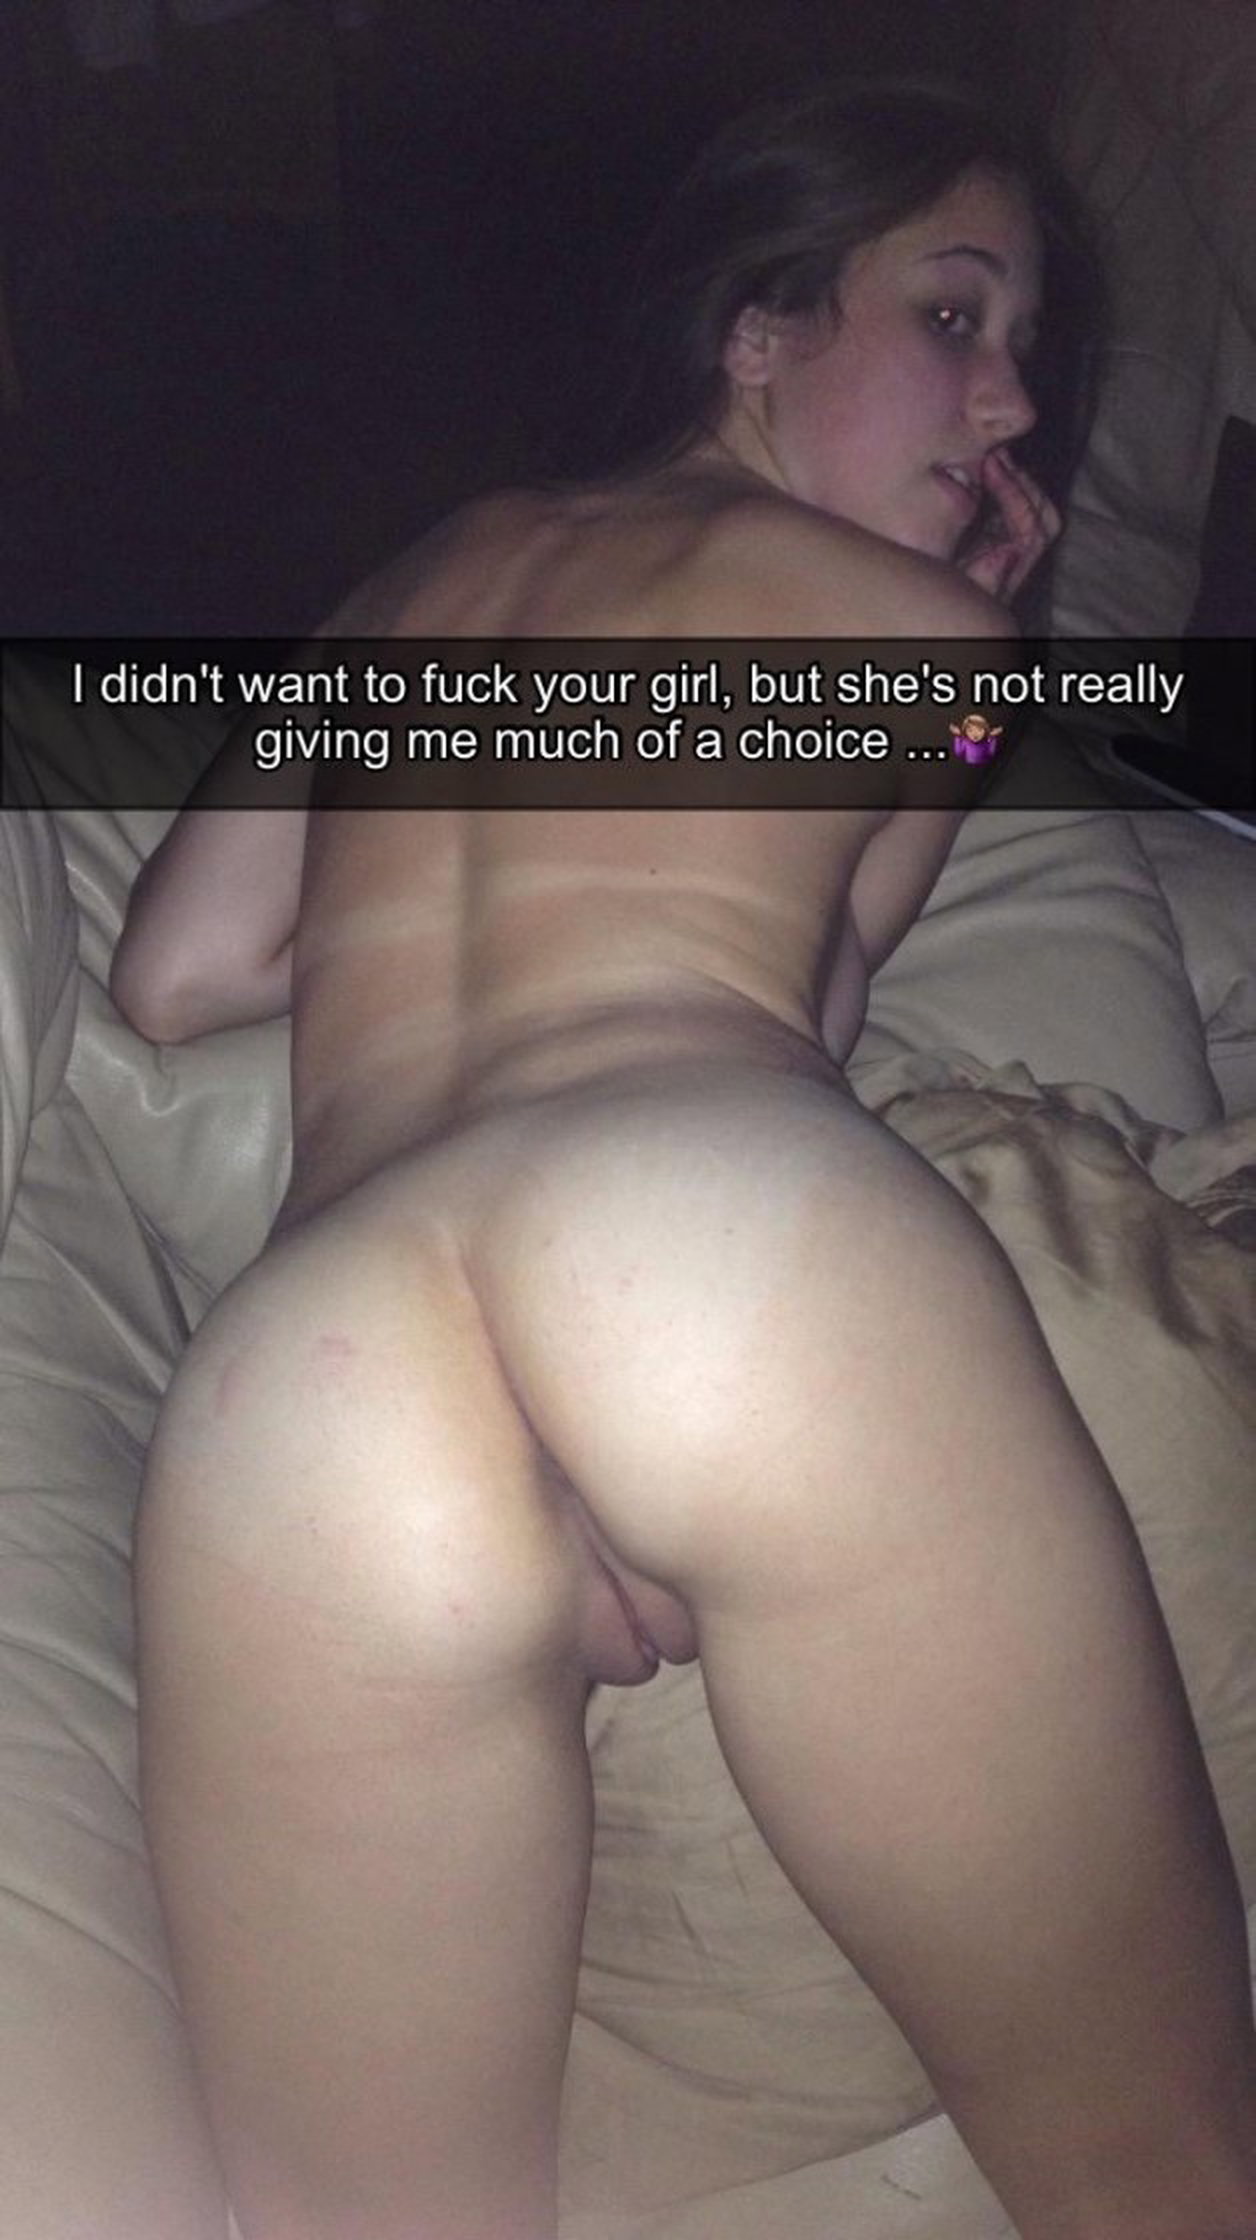 Photo by Cuckoldfantasies with the username @Cuckoldfantasies,  April 19, 2020 at 9:19 AM. The post is about the topic Cuckold Fantasy and the text says 'Oh I'm pretty sure you wanted - but I also want you to fuck her. 😉  #cuckold #snapchat #cheating'